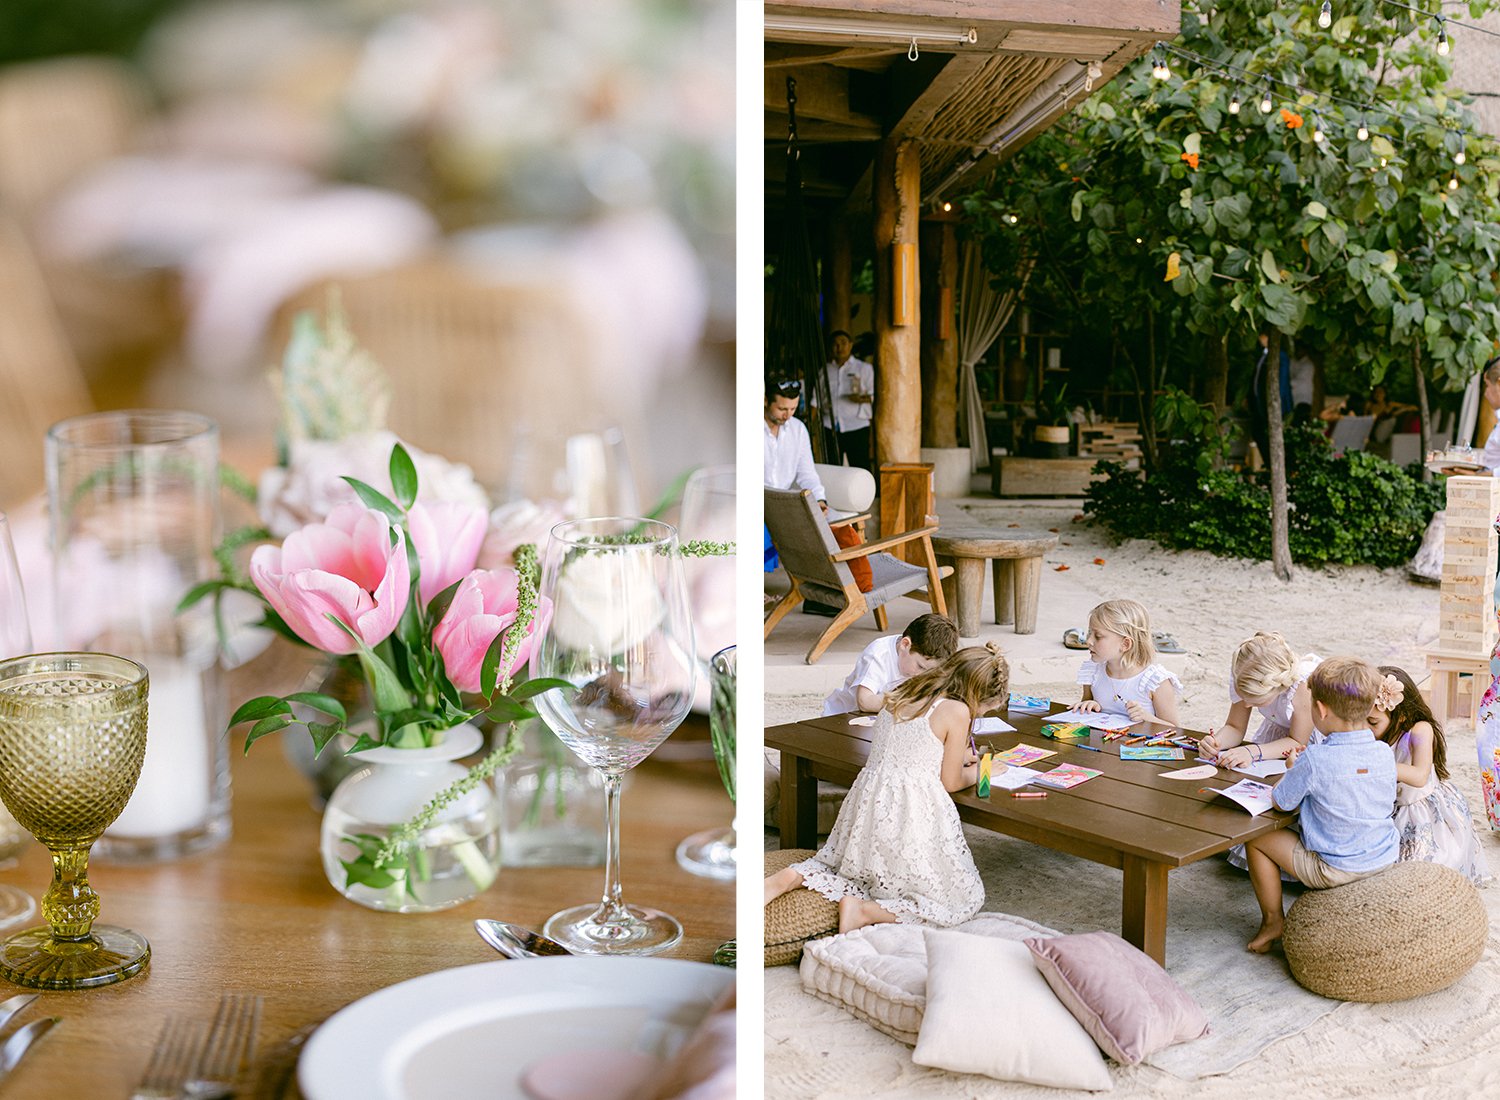 41 cute pink flowers on pots set on the tables for the wedding reception and a cute table for kids entertainment on the sand at Rosewood Mayakoba Riviera Maya Cancun Mexico.jpg